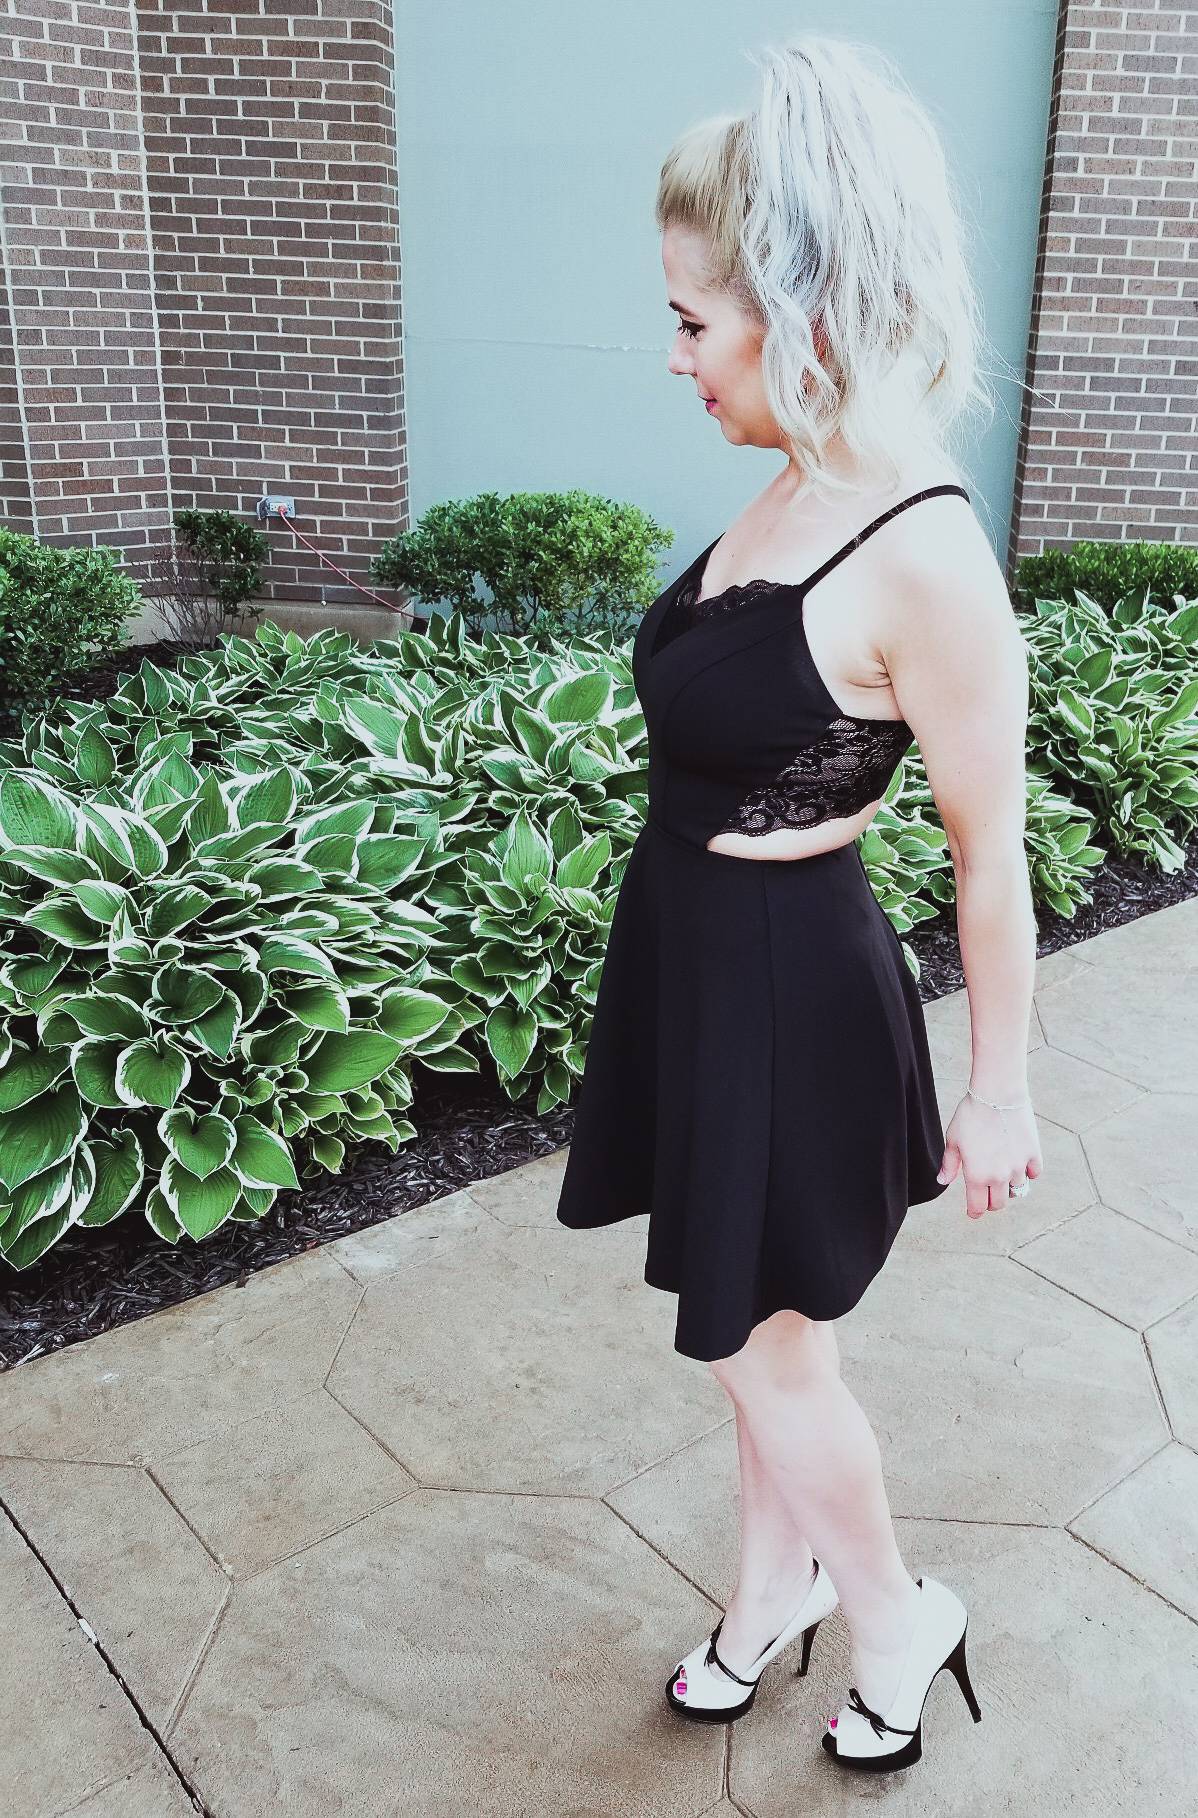 Perfect Affordable LBD for Summer 2018: This little black dress is stylish, flirty, and around $30! Fashion blogger COVET by tricia showcases this unique black lace back dress with platform heels to create a stunning summer 2018 fashion look. You'll definitely want to show off the zipper and lace back on this affordable LBD!